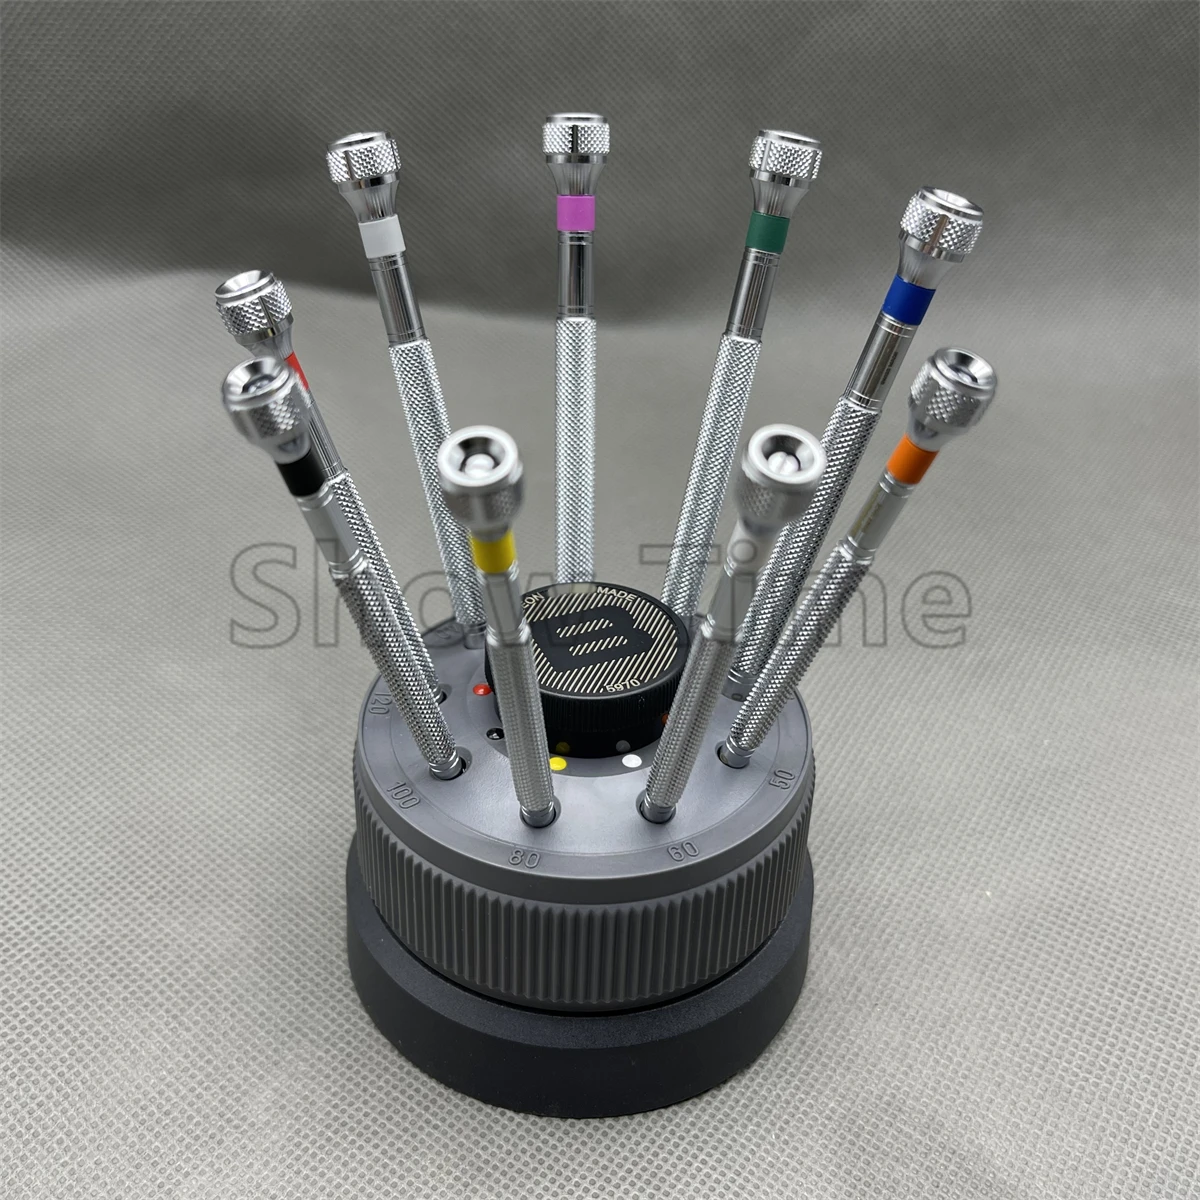 

Swiss Bergeon 5970 Rotating stand with 9 stainless steell screwdrivers with colured slots for spare blades watchmaker